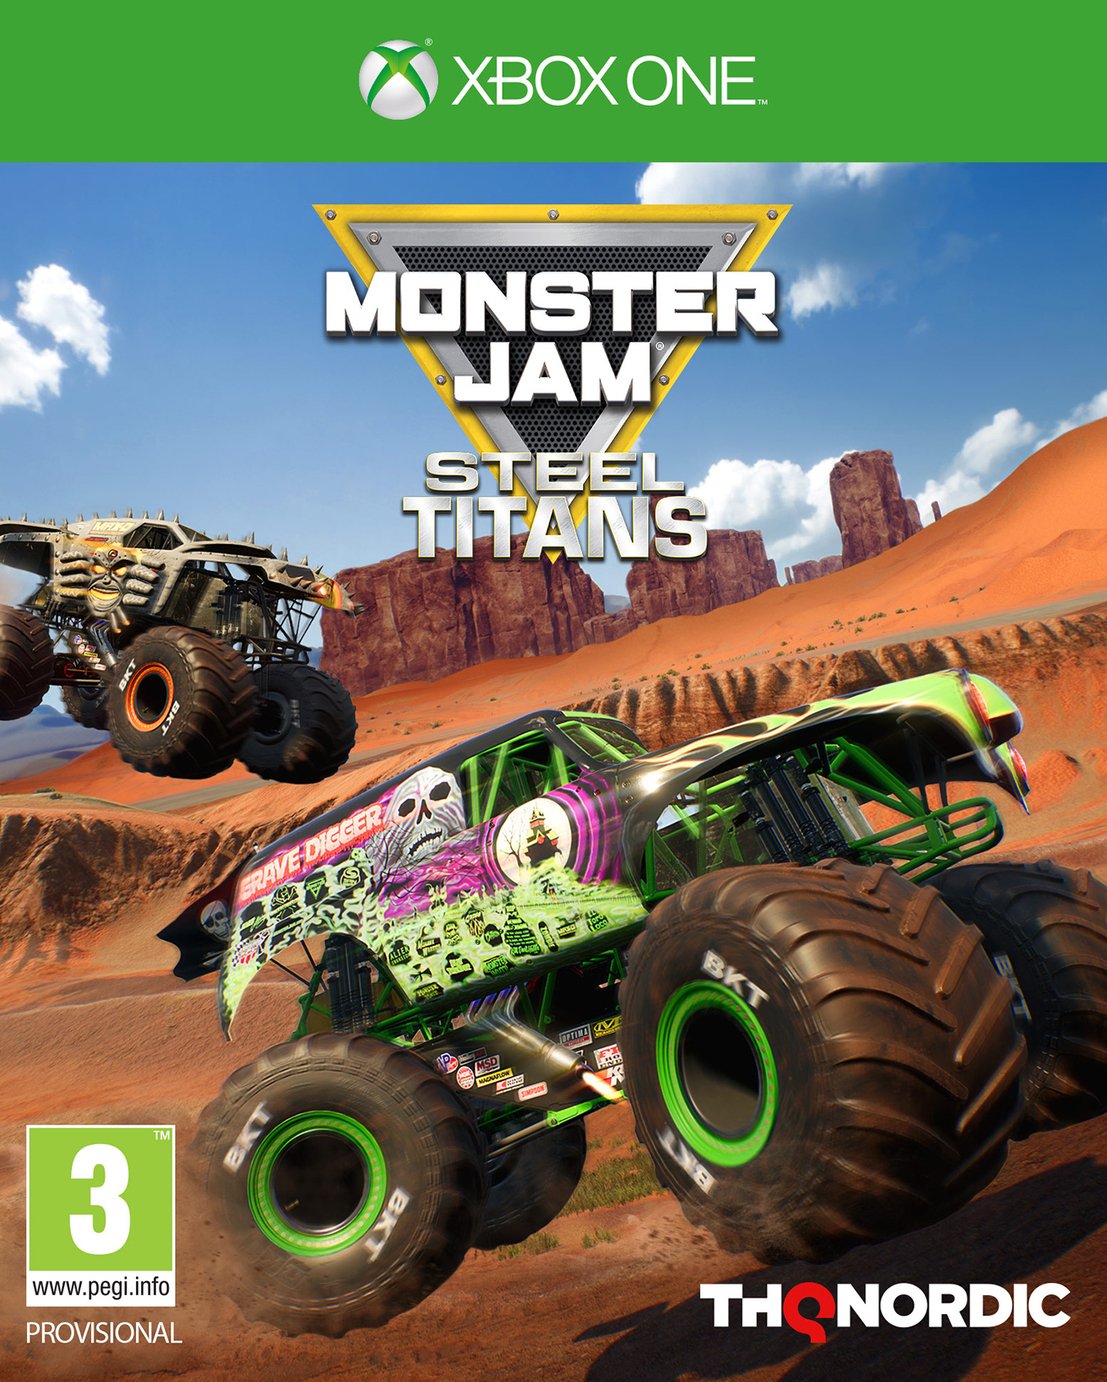 Monster Jam: Steel Titans Xbox One Pre-Order Game review